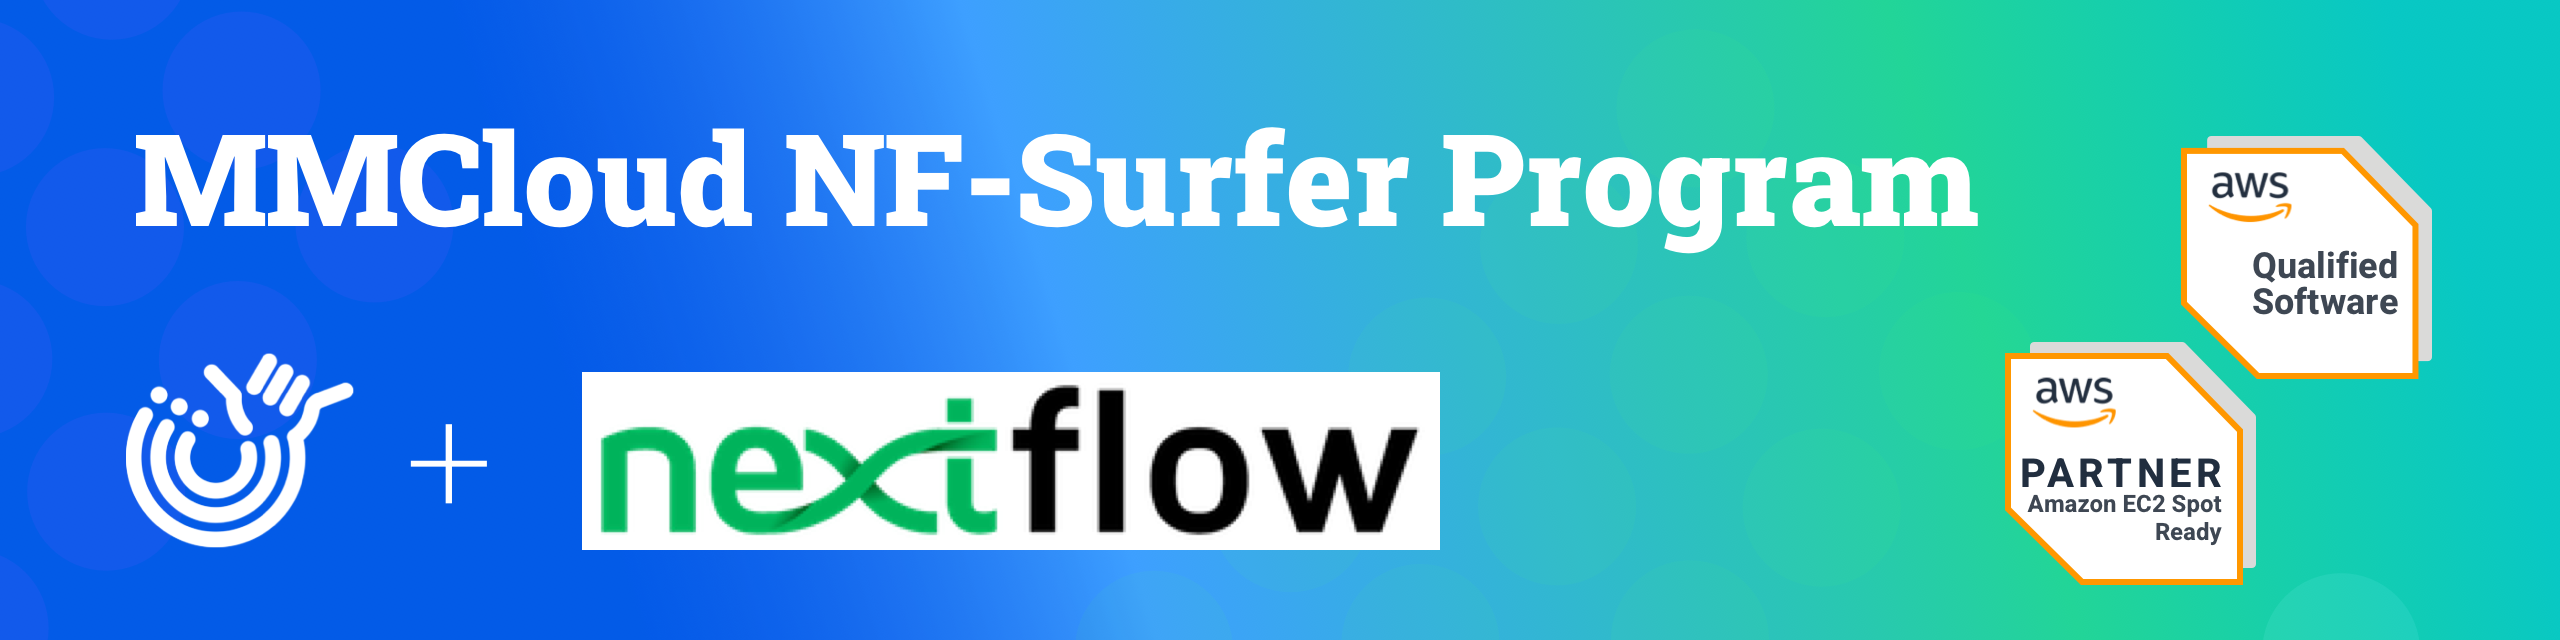 Unveiling the MMCloud NF-Surfer Program: A Golden Opportunity for Nextflow/nf-core Researchers 🌟